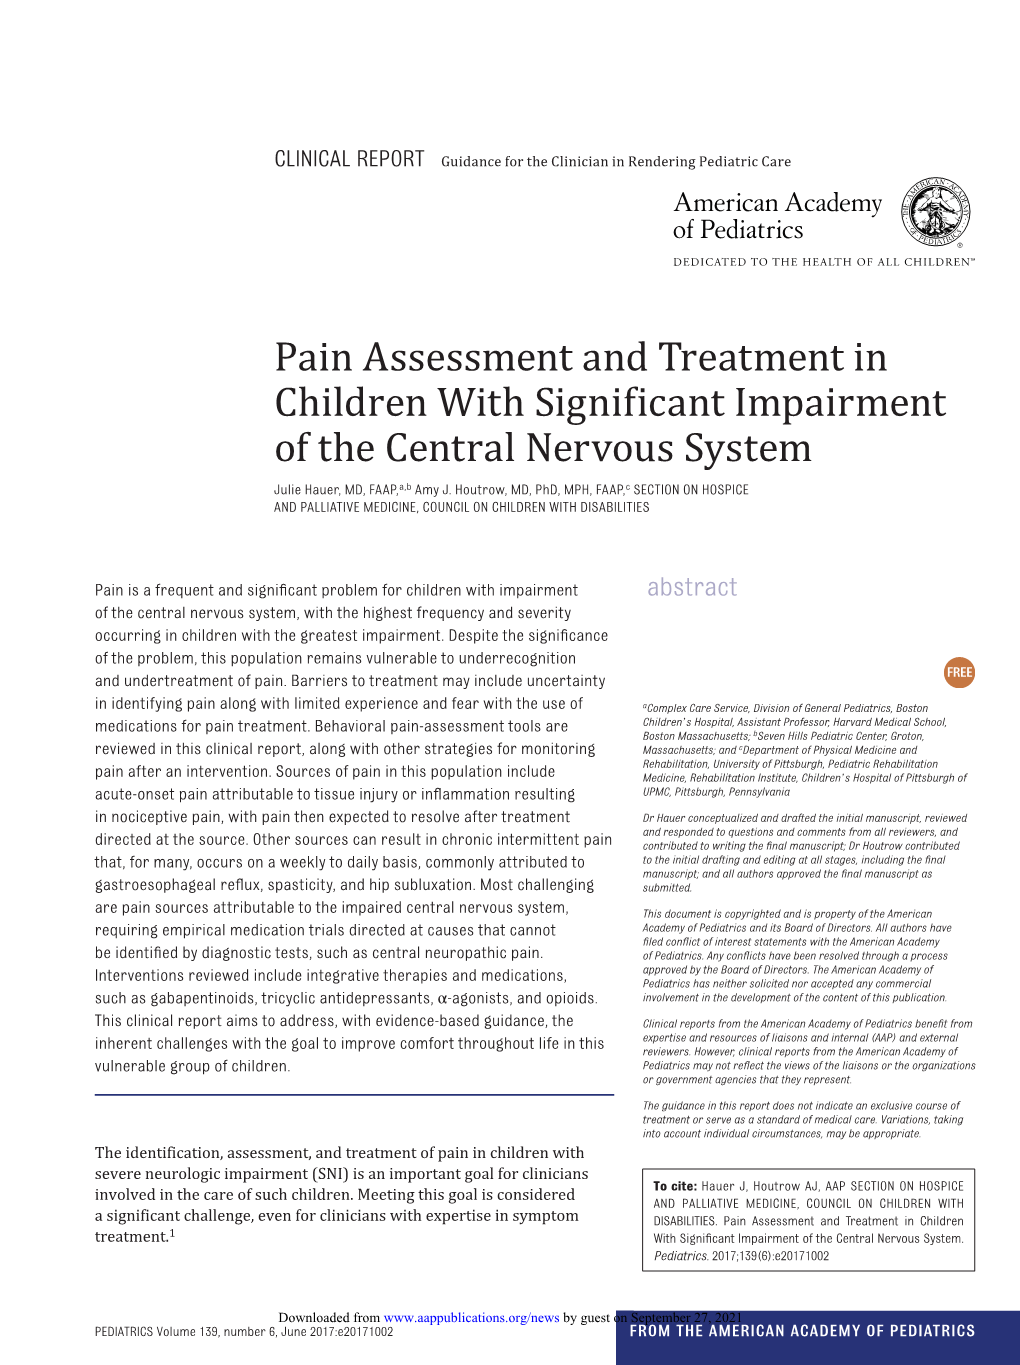 Pain Assessment and Treatment in Children with Significant Impairment of the Central Nervous System Julie Hauer, Amy J